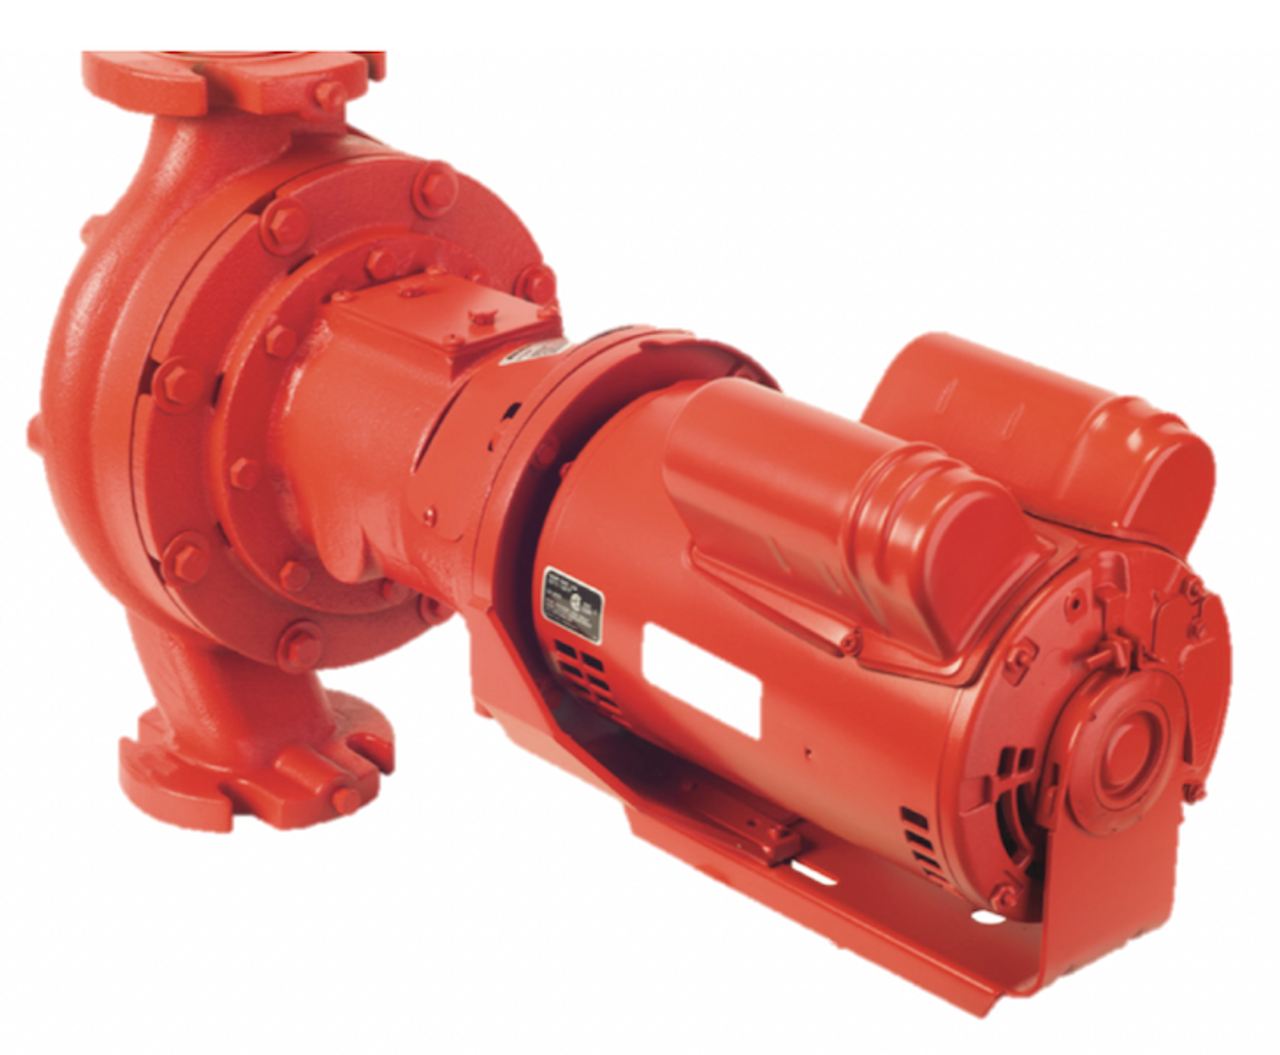 174033MF-013 Armstrong S-35 Cast Iron Pump | National Pump Supply